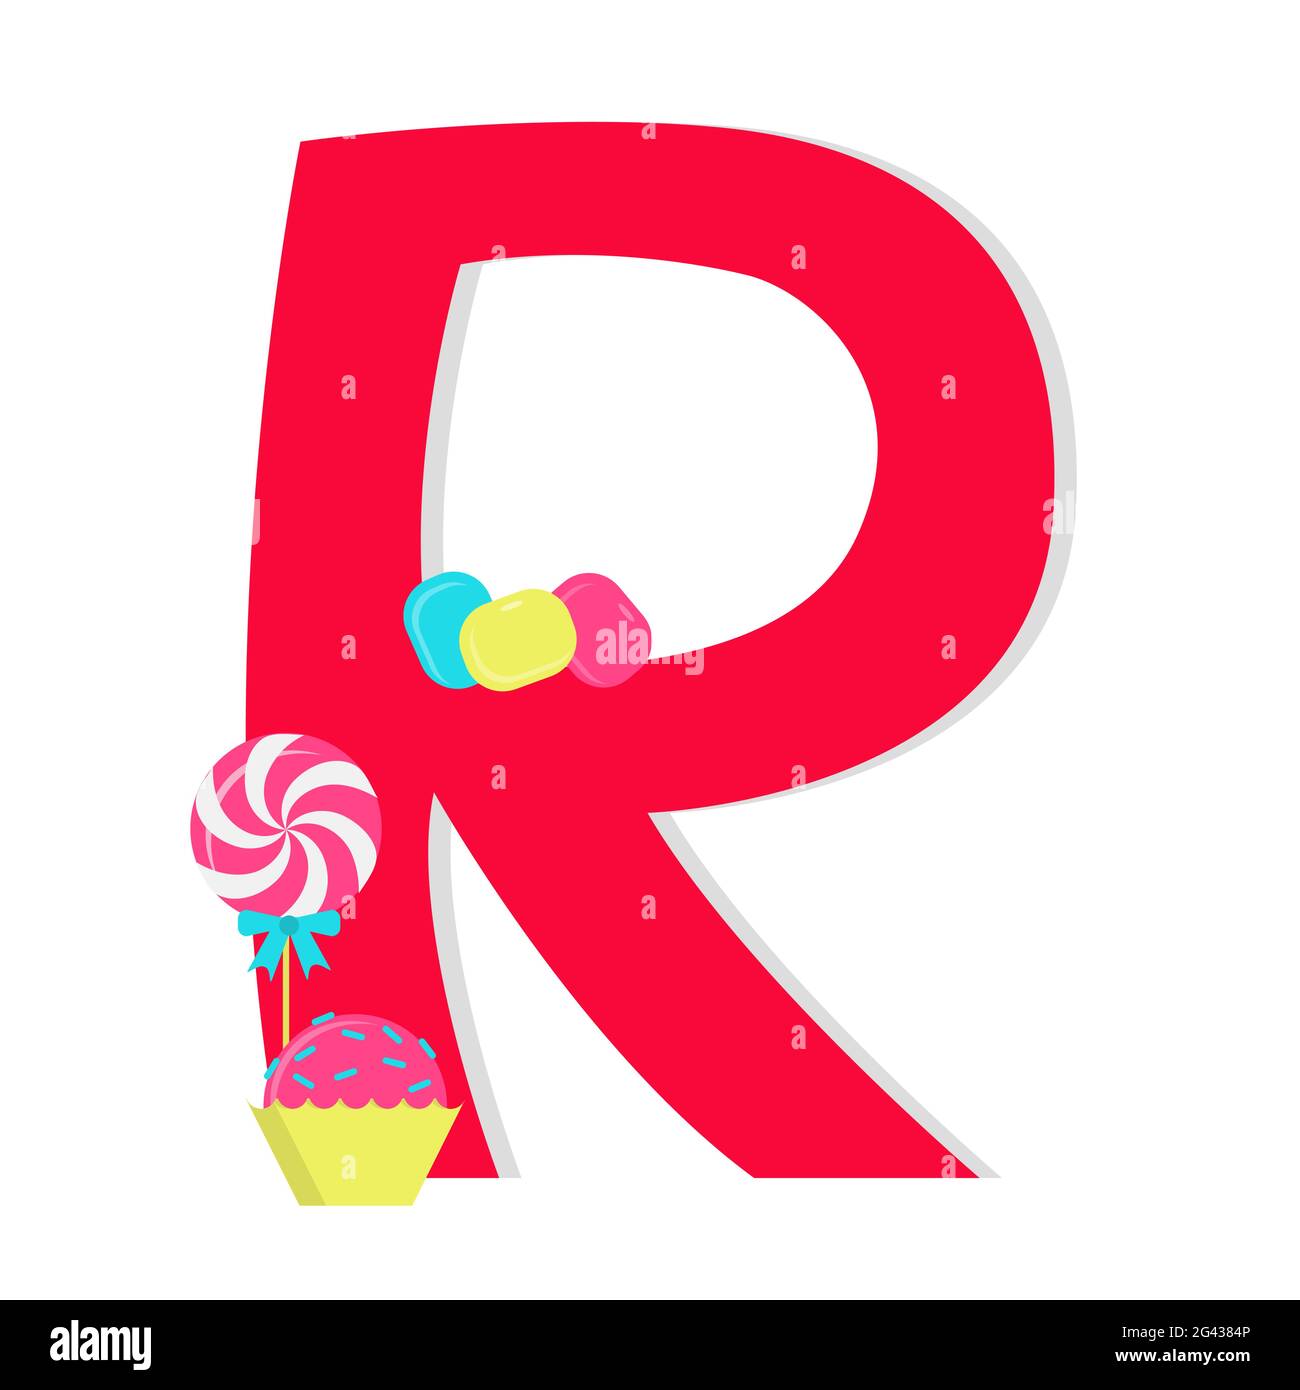 Letter "r" from stylized alphabet with candies: lollipop, tablets candy, brigadeiro. White background. Stock Vector